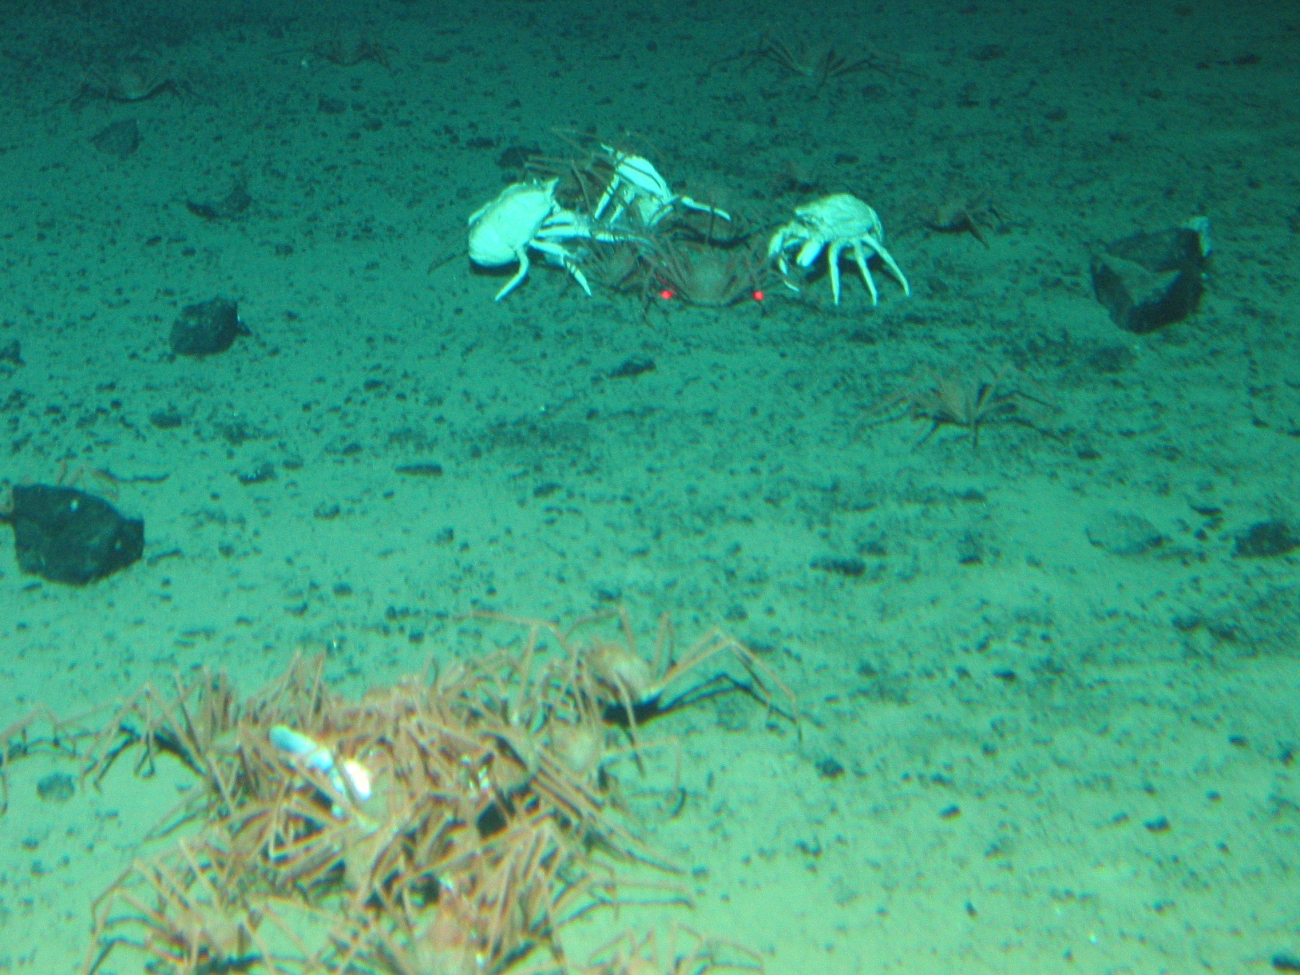 A group of crabs known by some as a cast of crabs, feeding on a dead fish